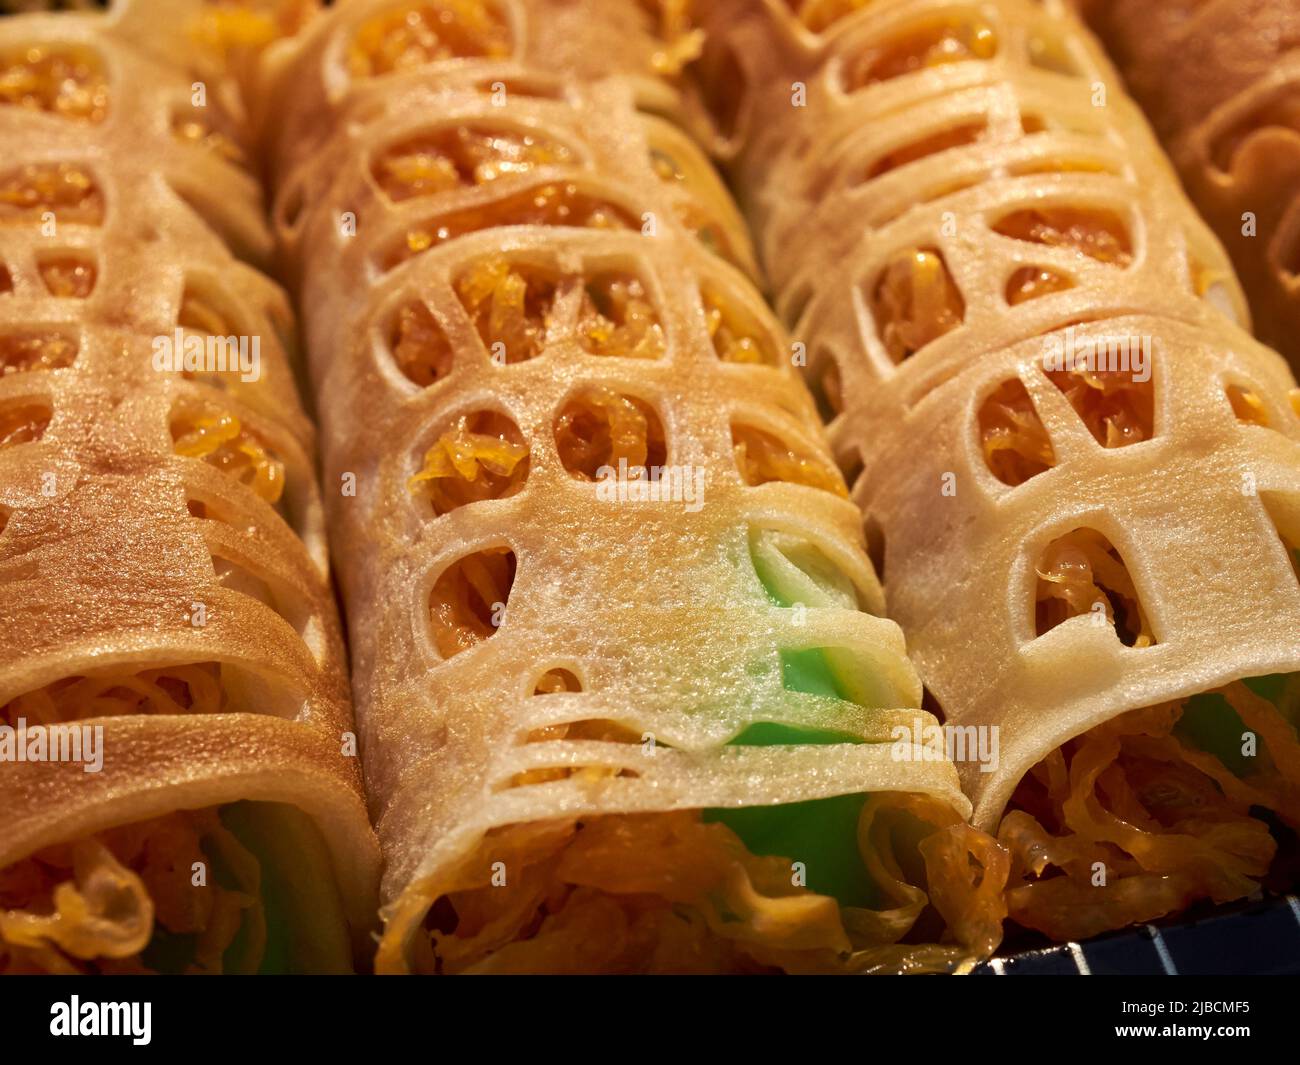 Thai rolled crepes filled with pandan cream from a vendor in Little Thailand, Elmhurst, Queens, New York City, USA Stock Photo